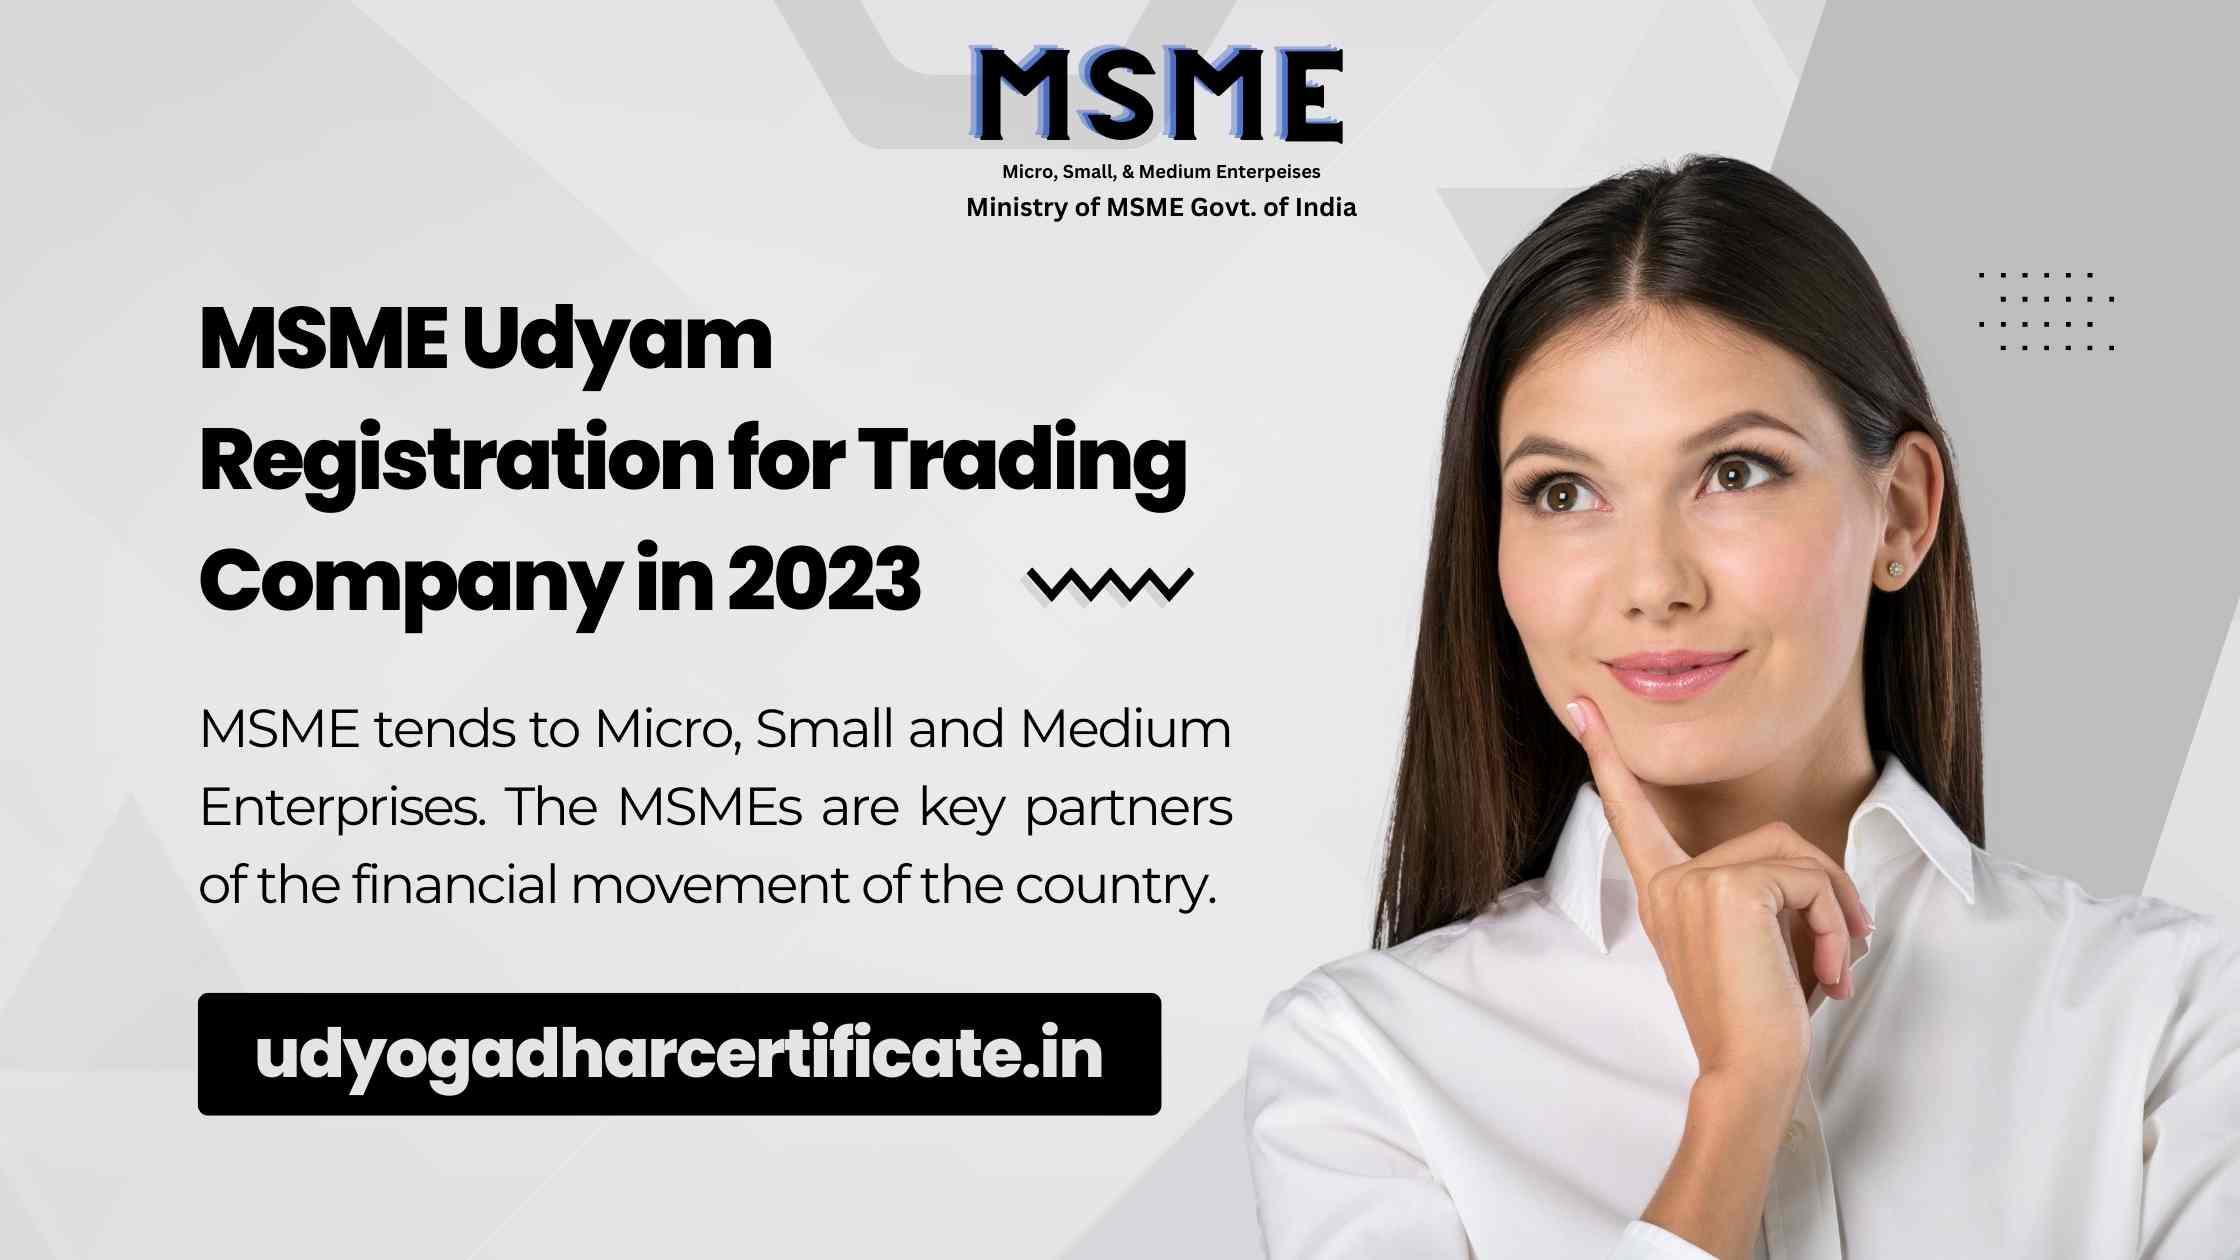 MSME Udyam Registration for Trading Company in 2023